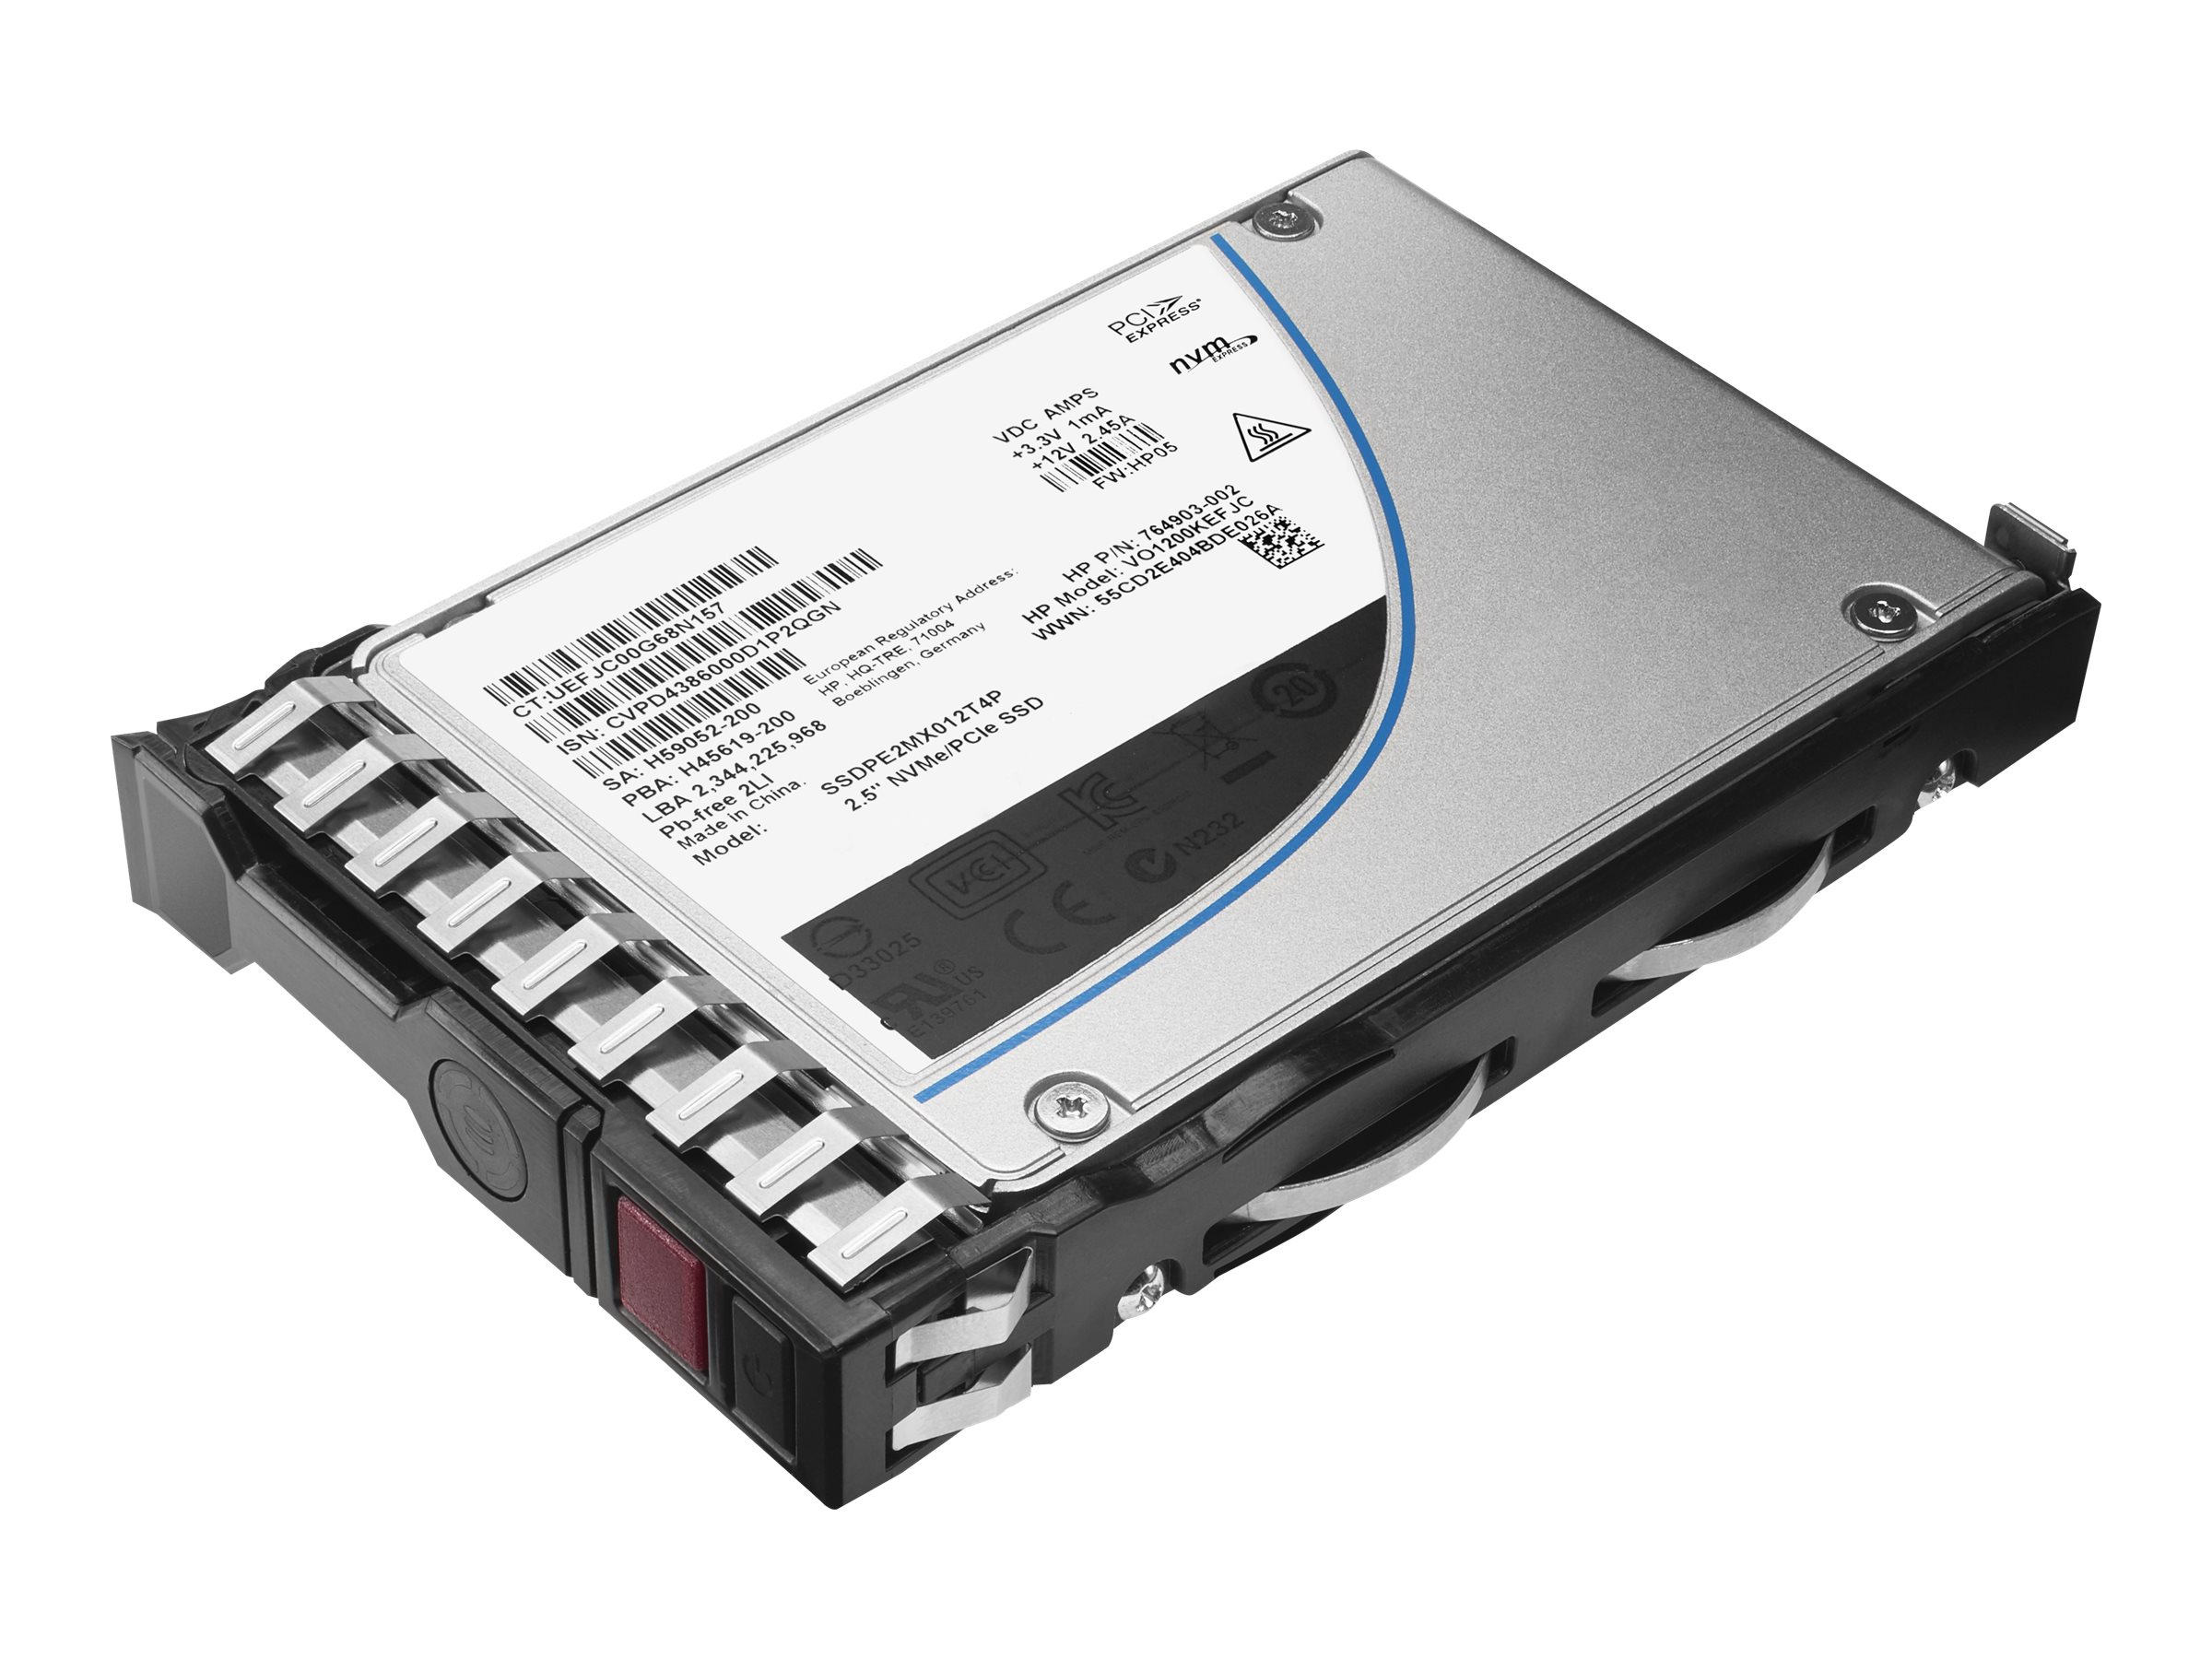 HPE Mixed Use-2 - SSD - 800 GB - Hot-Swap - 3.5